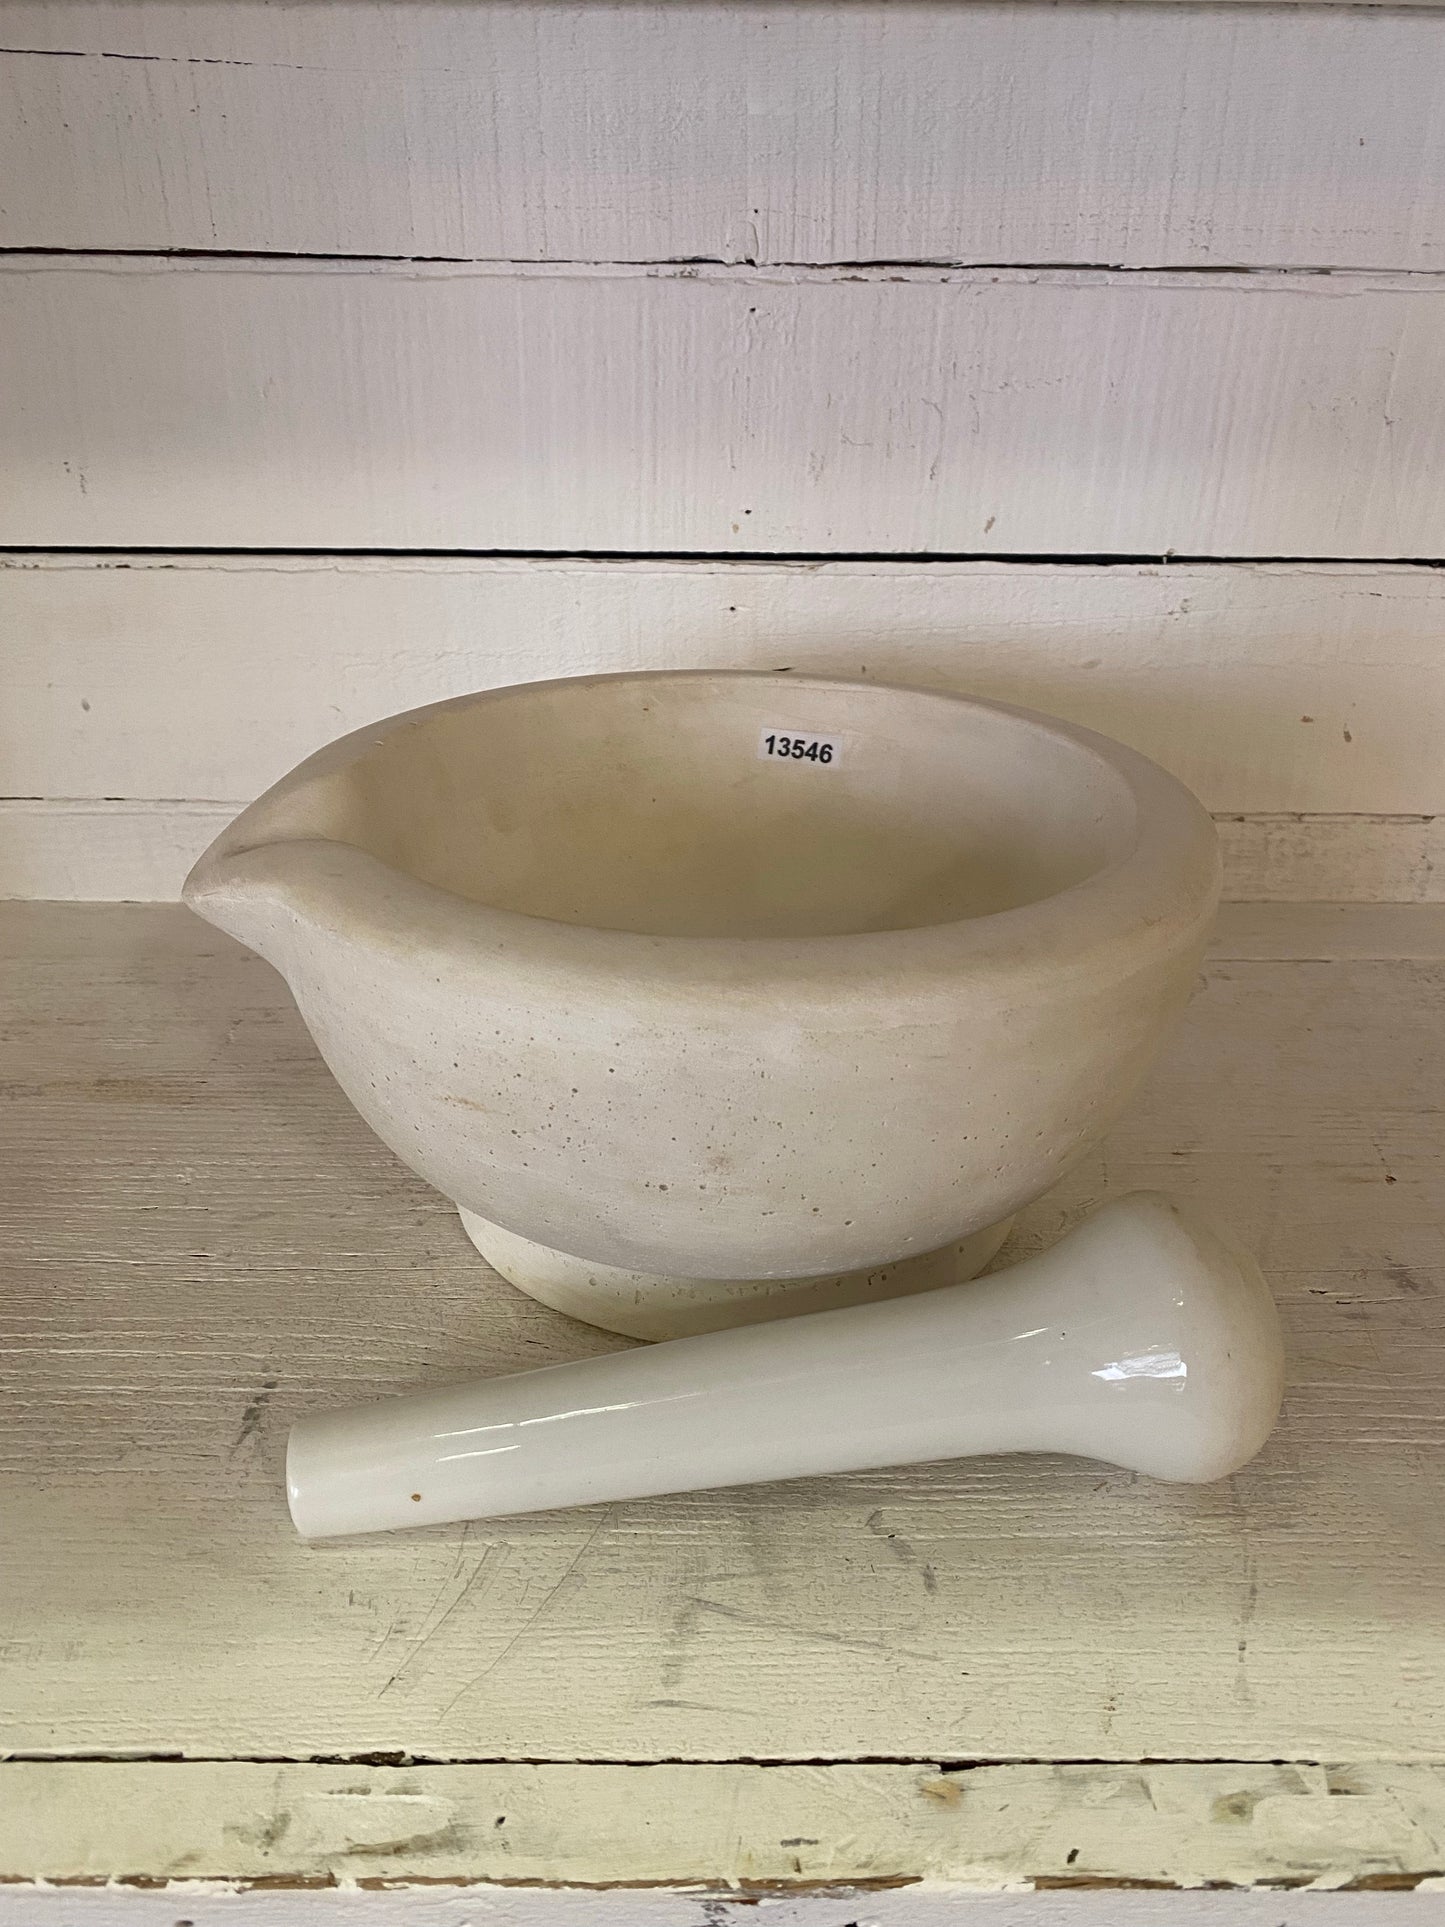 Stone Mortar with Pestle from Berlin (Large)